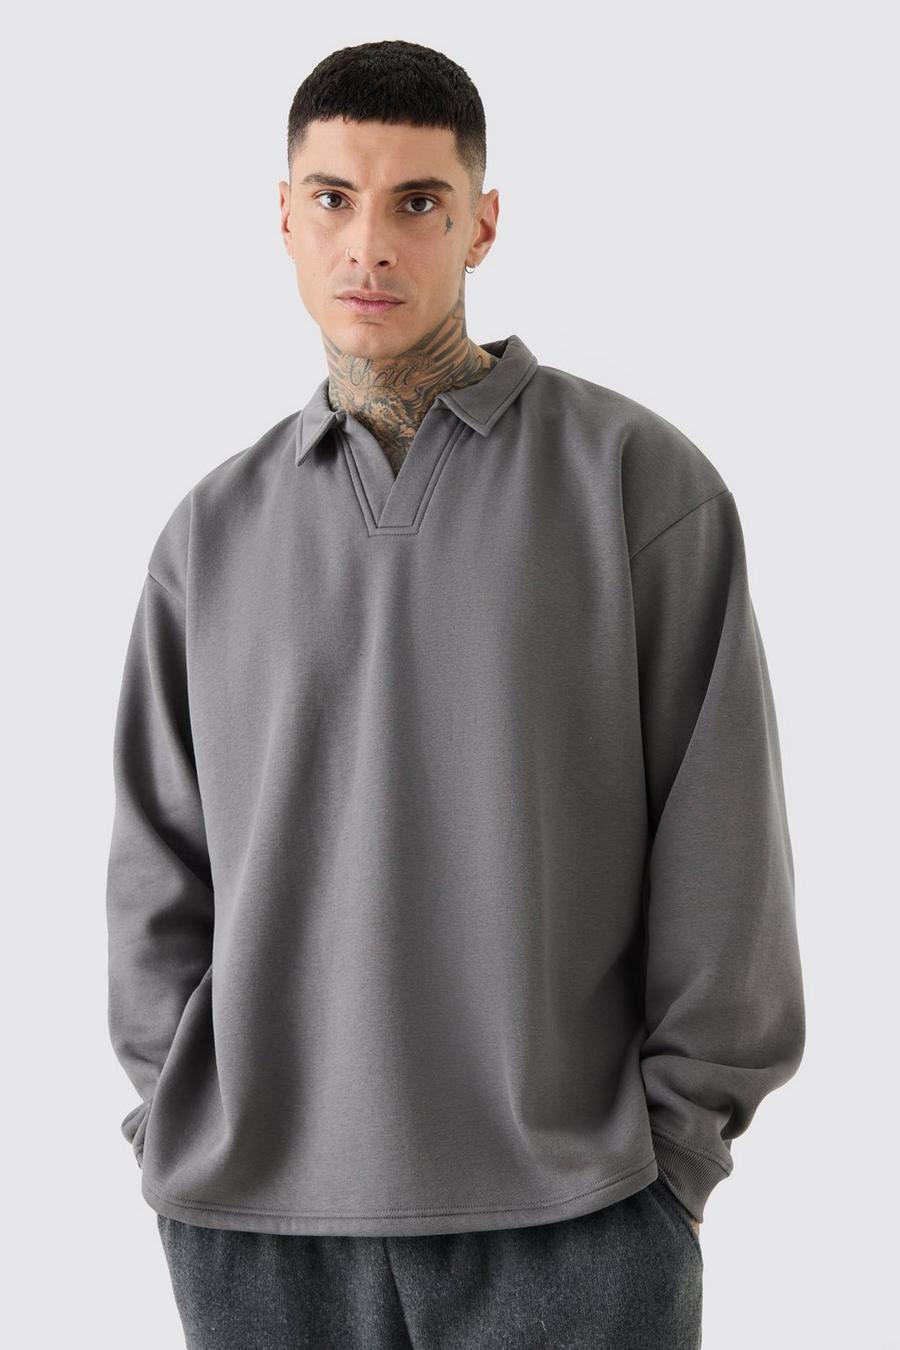 Charcoal Tall Oversized Revere Rugby Sweatshirt Polo 